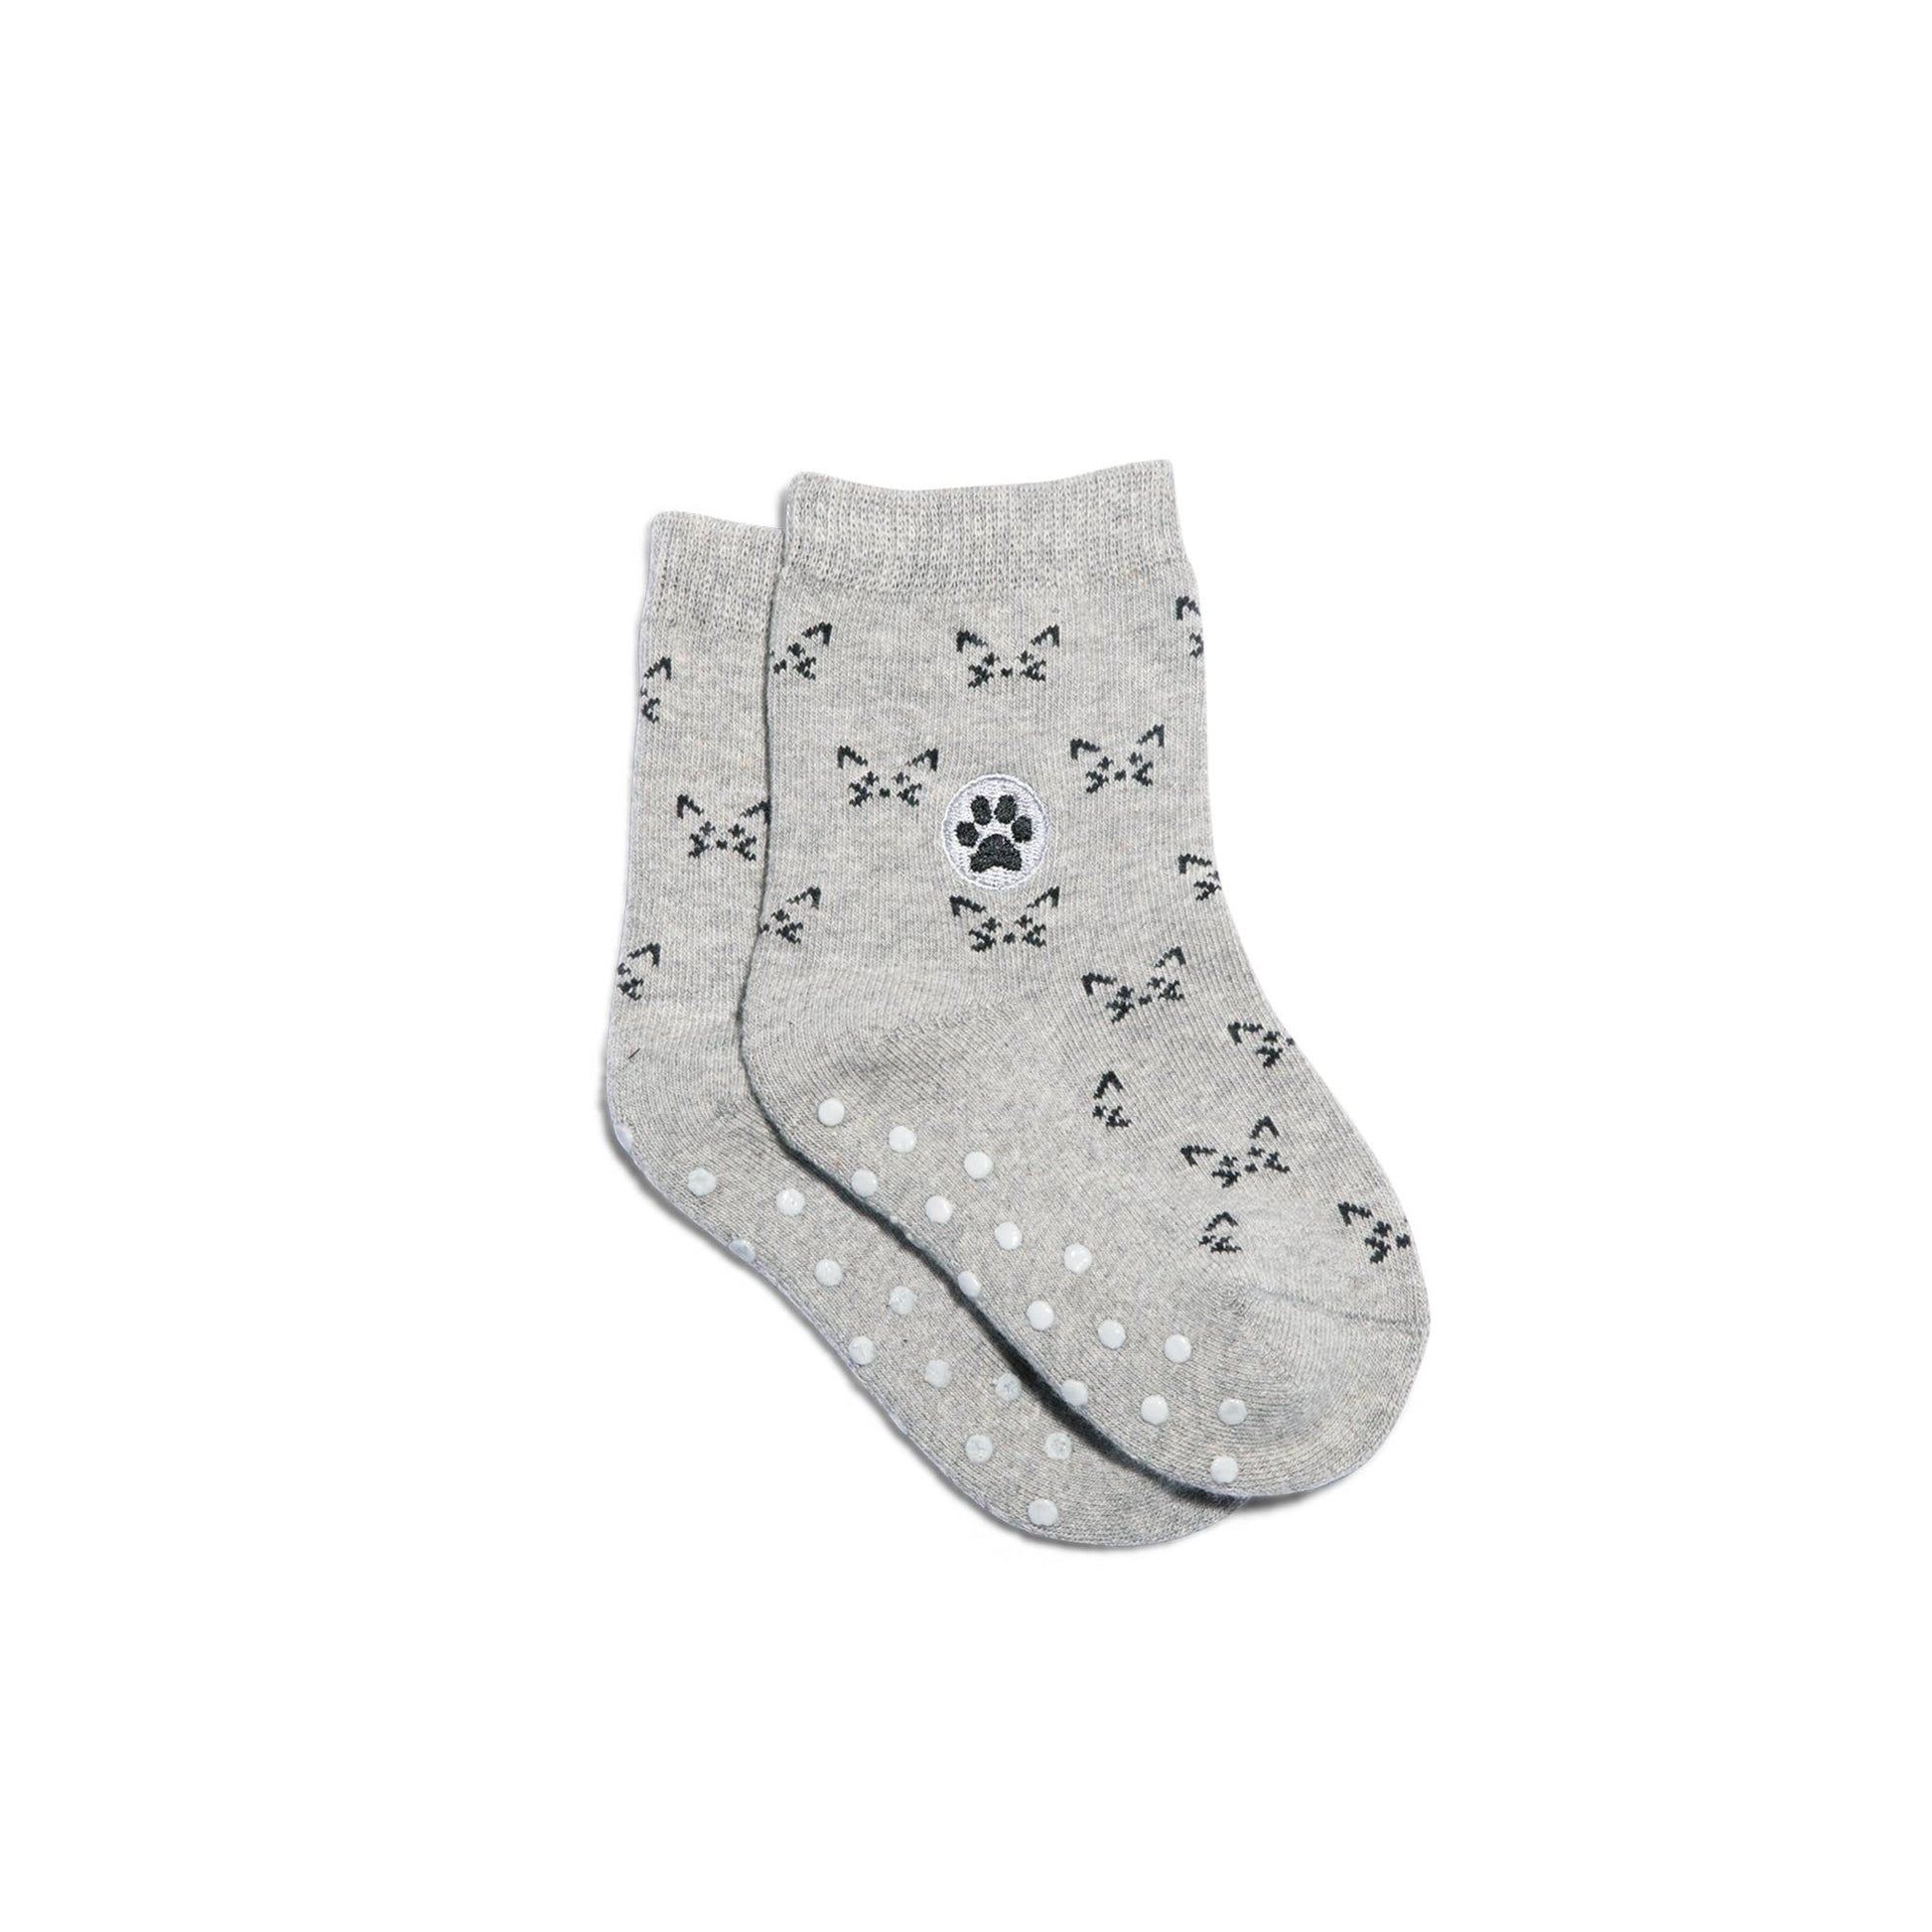 Conscious Step - Kids Socks that Save Cats  Conscious Step   -better made easy-eco-friendly-sustainable-gifting